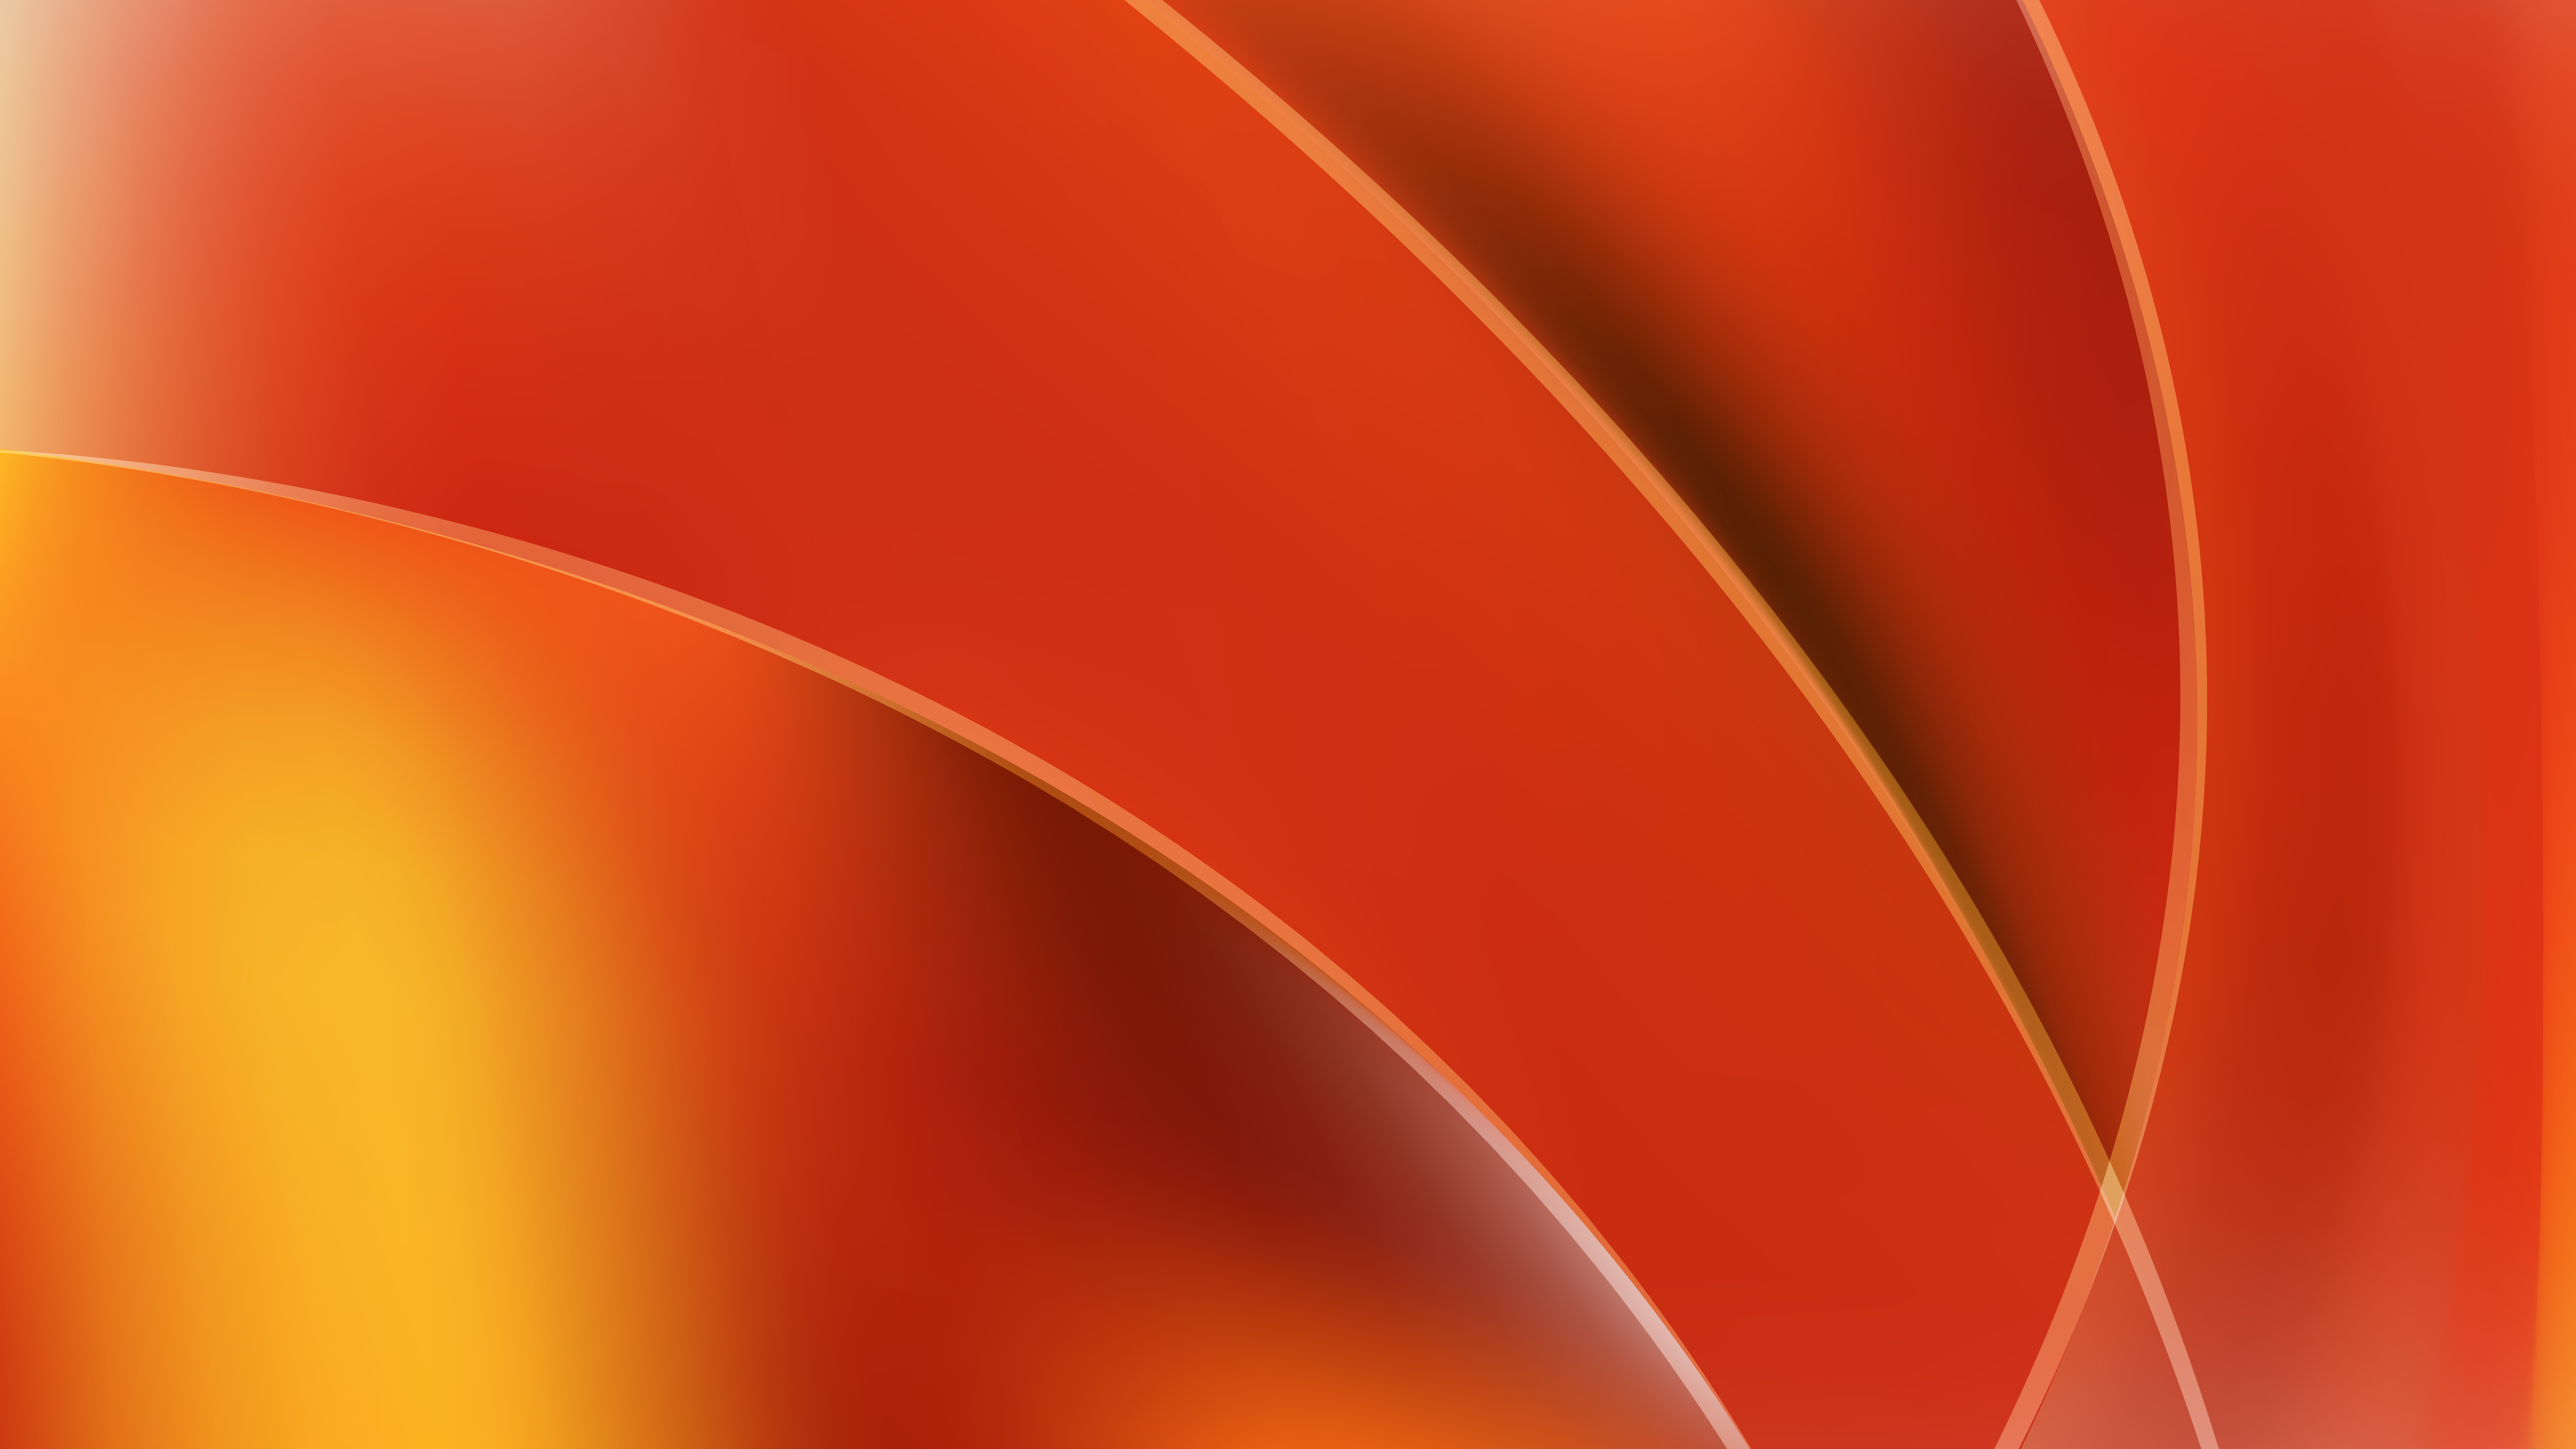 Red and orange background Vectors & Illustrations for Free Download